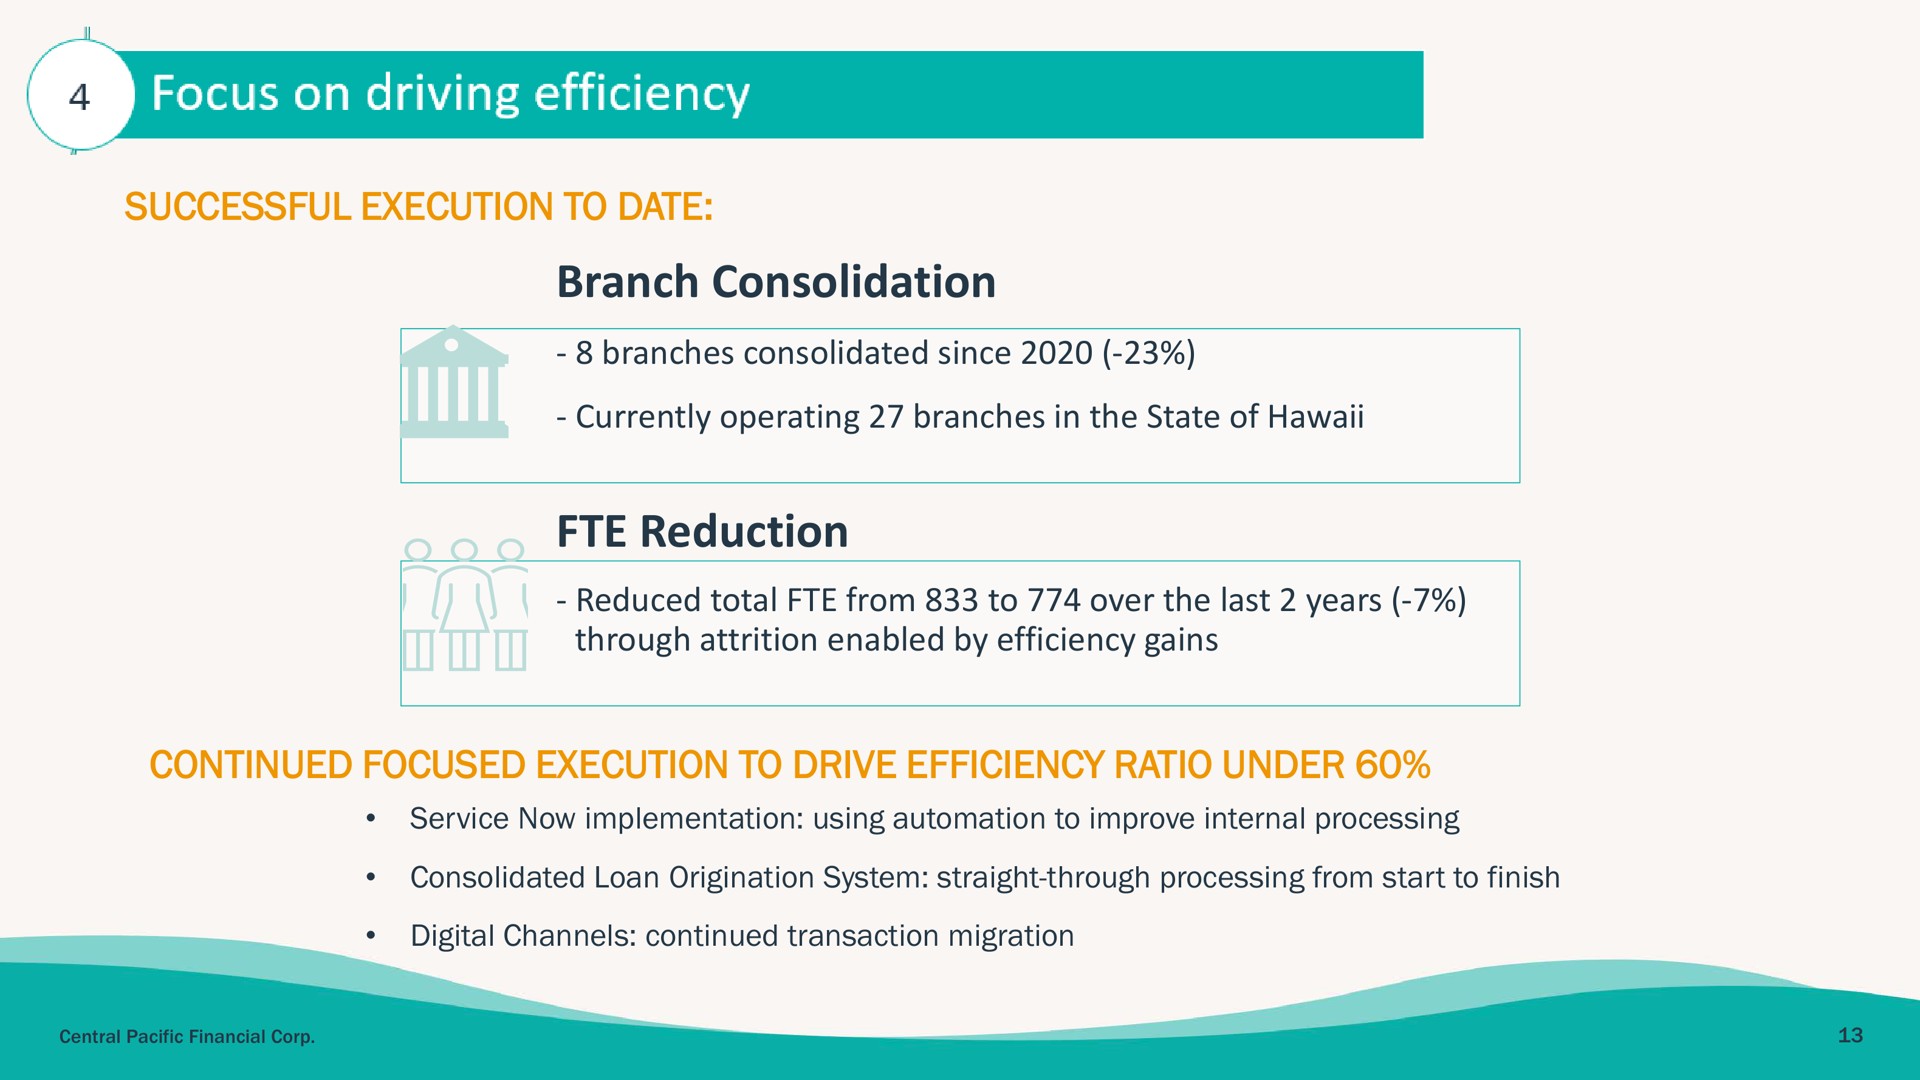 branch consolidation reduction focus on driving efficiency | Central Pacific Financial